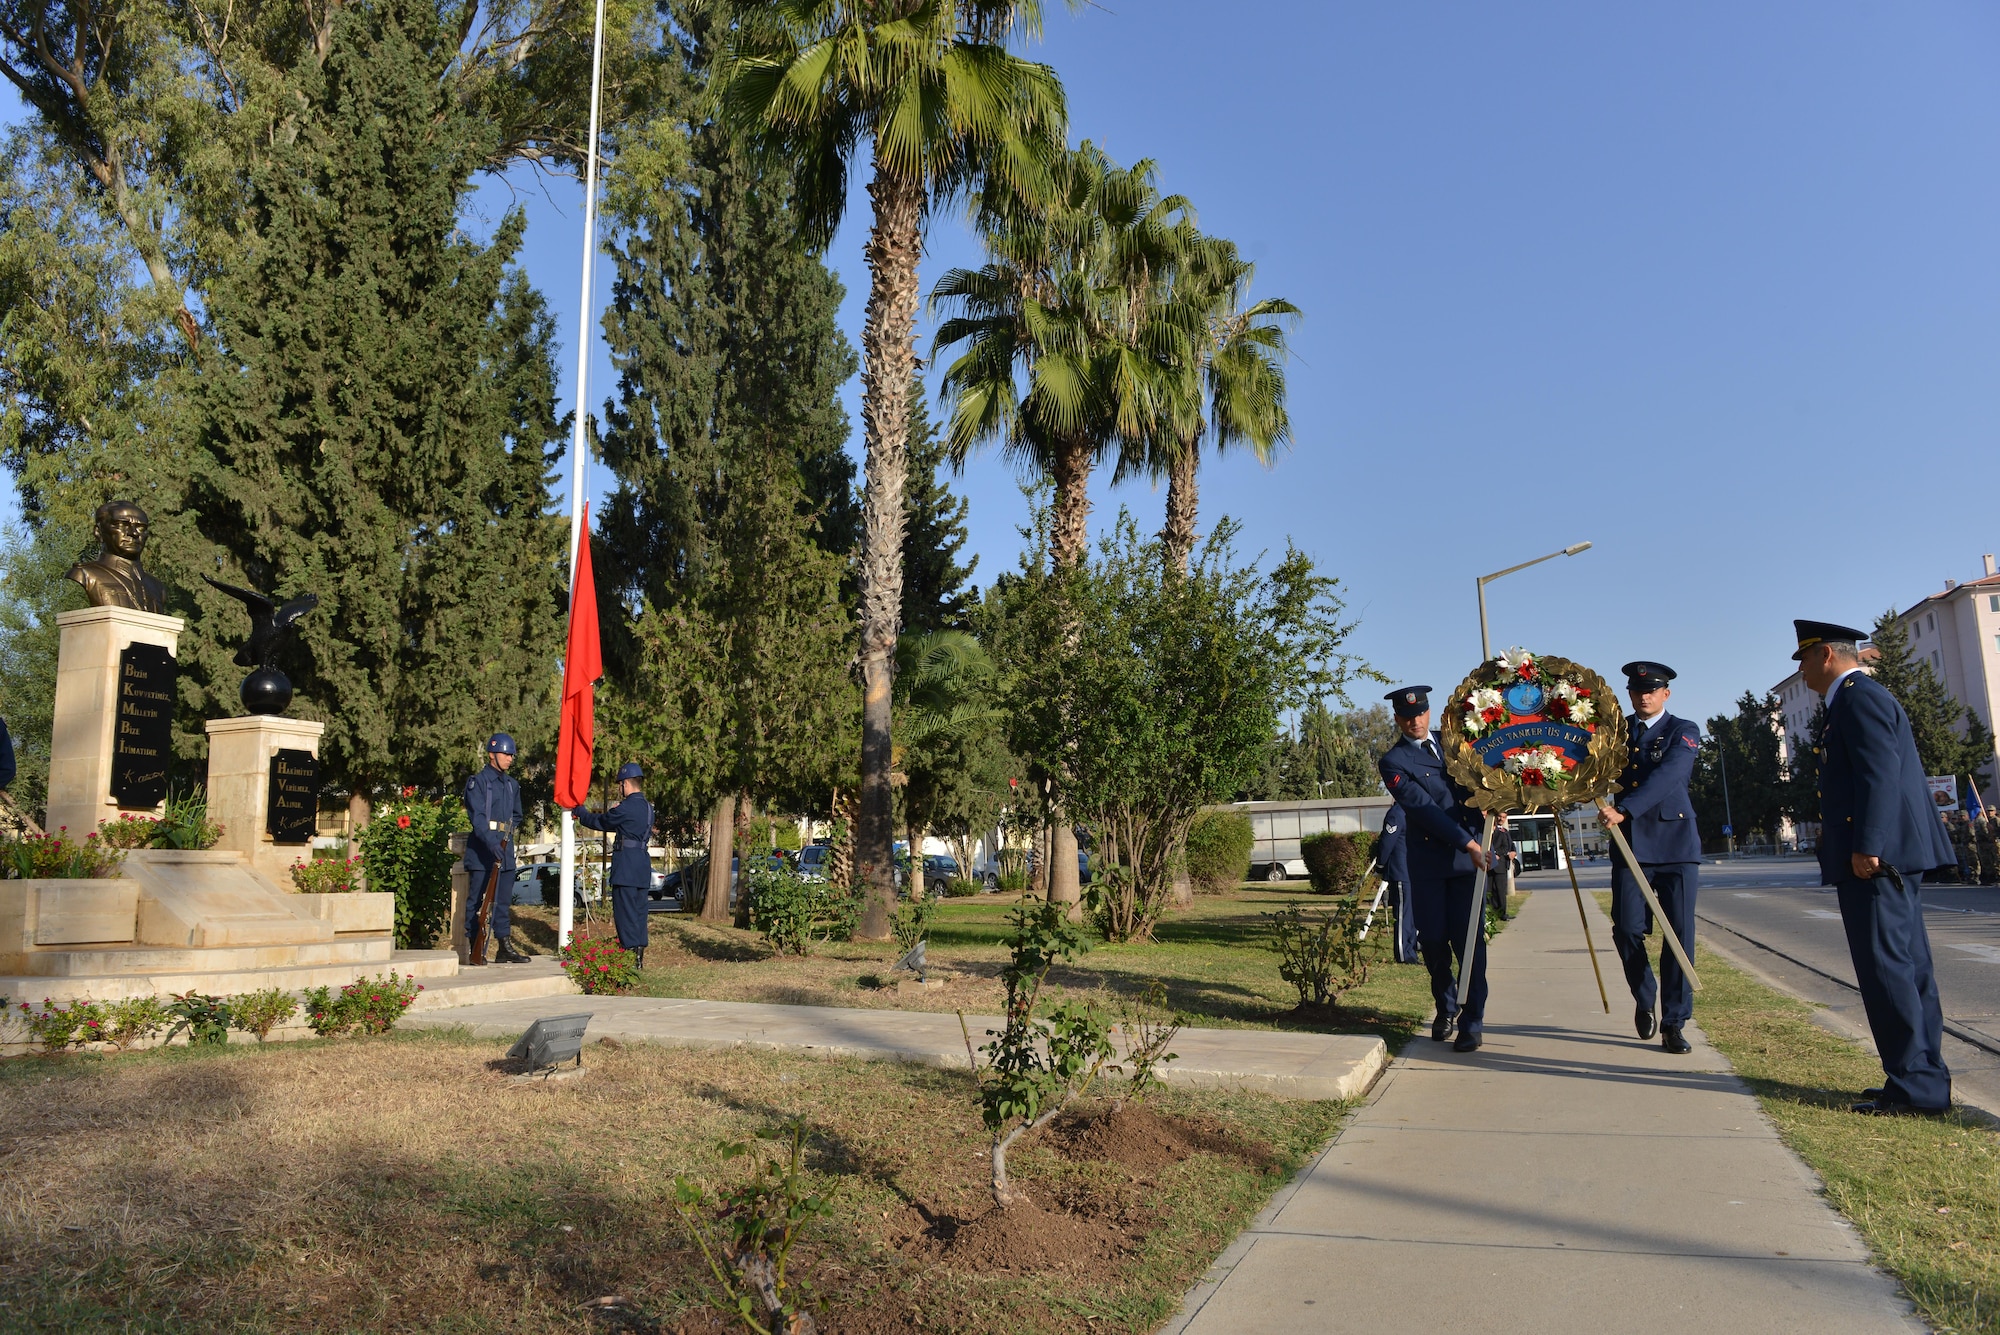 Turkish Air Force members assigned to the 10th Tanker Base carry a wreath during a memorial ceremony for Mustafa Kemal Ataturk Nov. 10, 2016, at Incirlik Air Base, Turkey. Ataturk was the founder and first president of the modern Republic of Turkey. (U.S. Air Force photo by Senior Airman John Nieves Camacho)